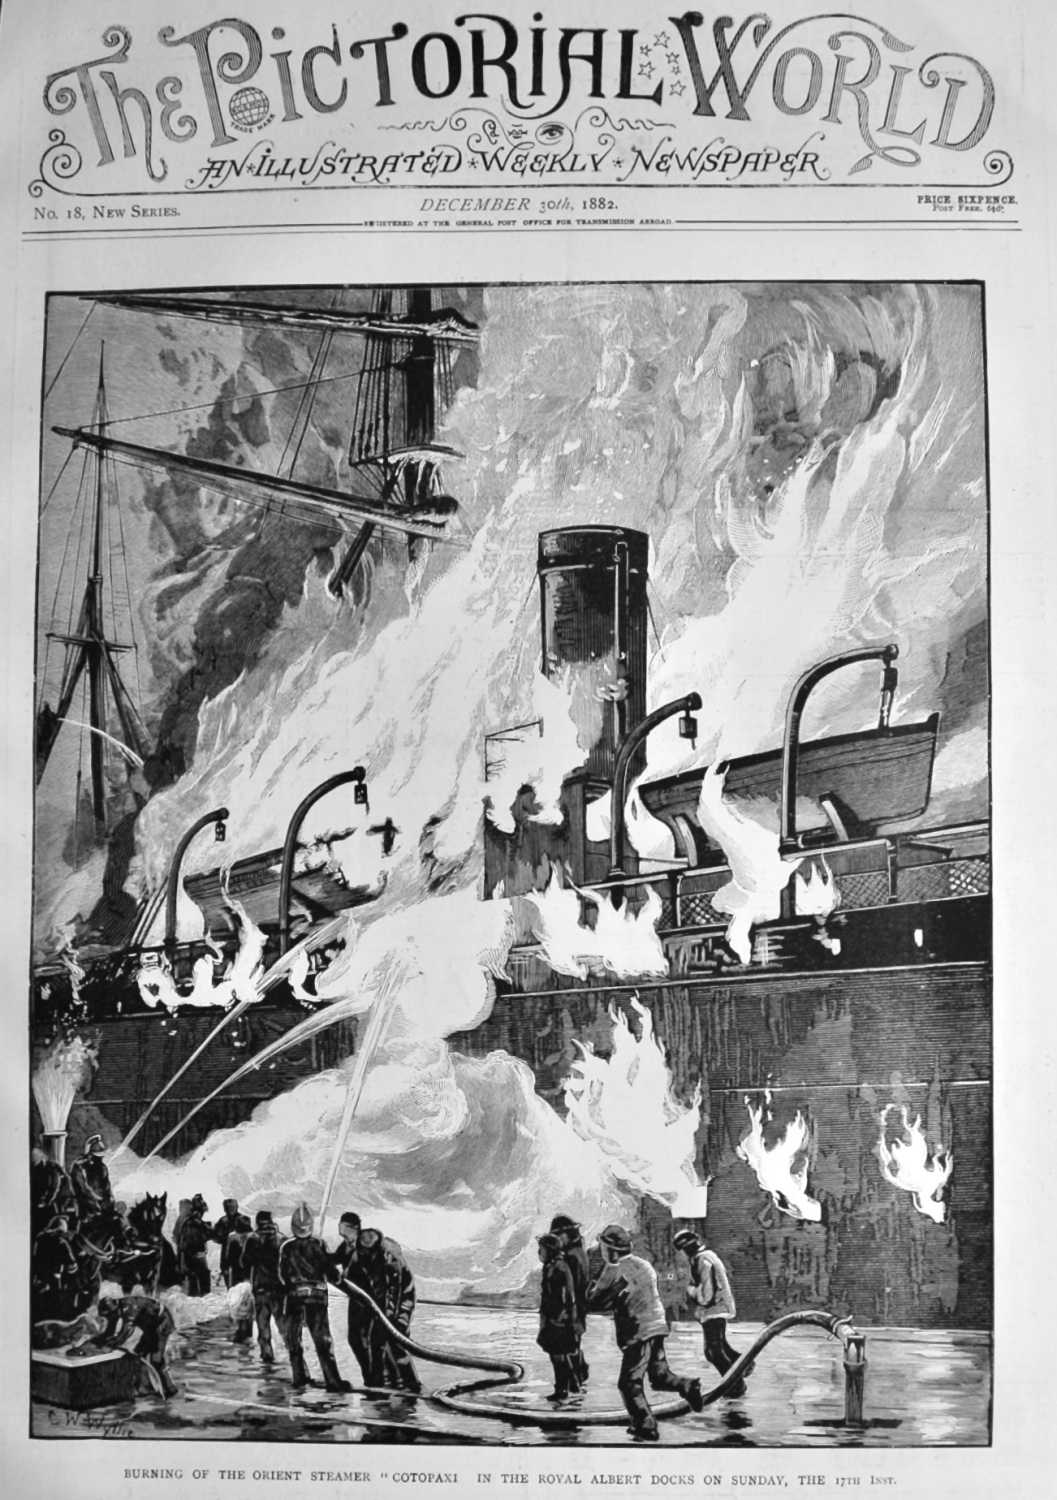 Burning of the Orient Steamer 